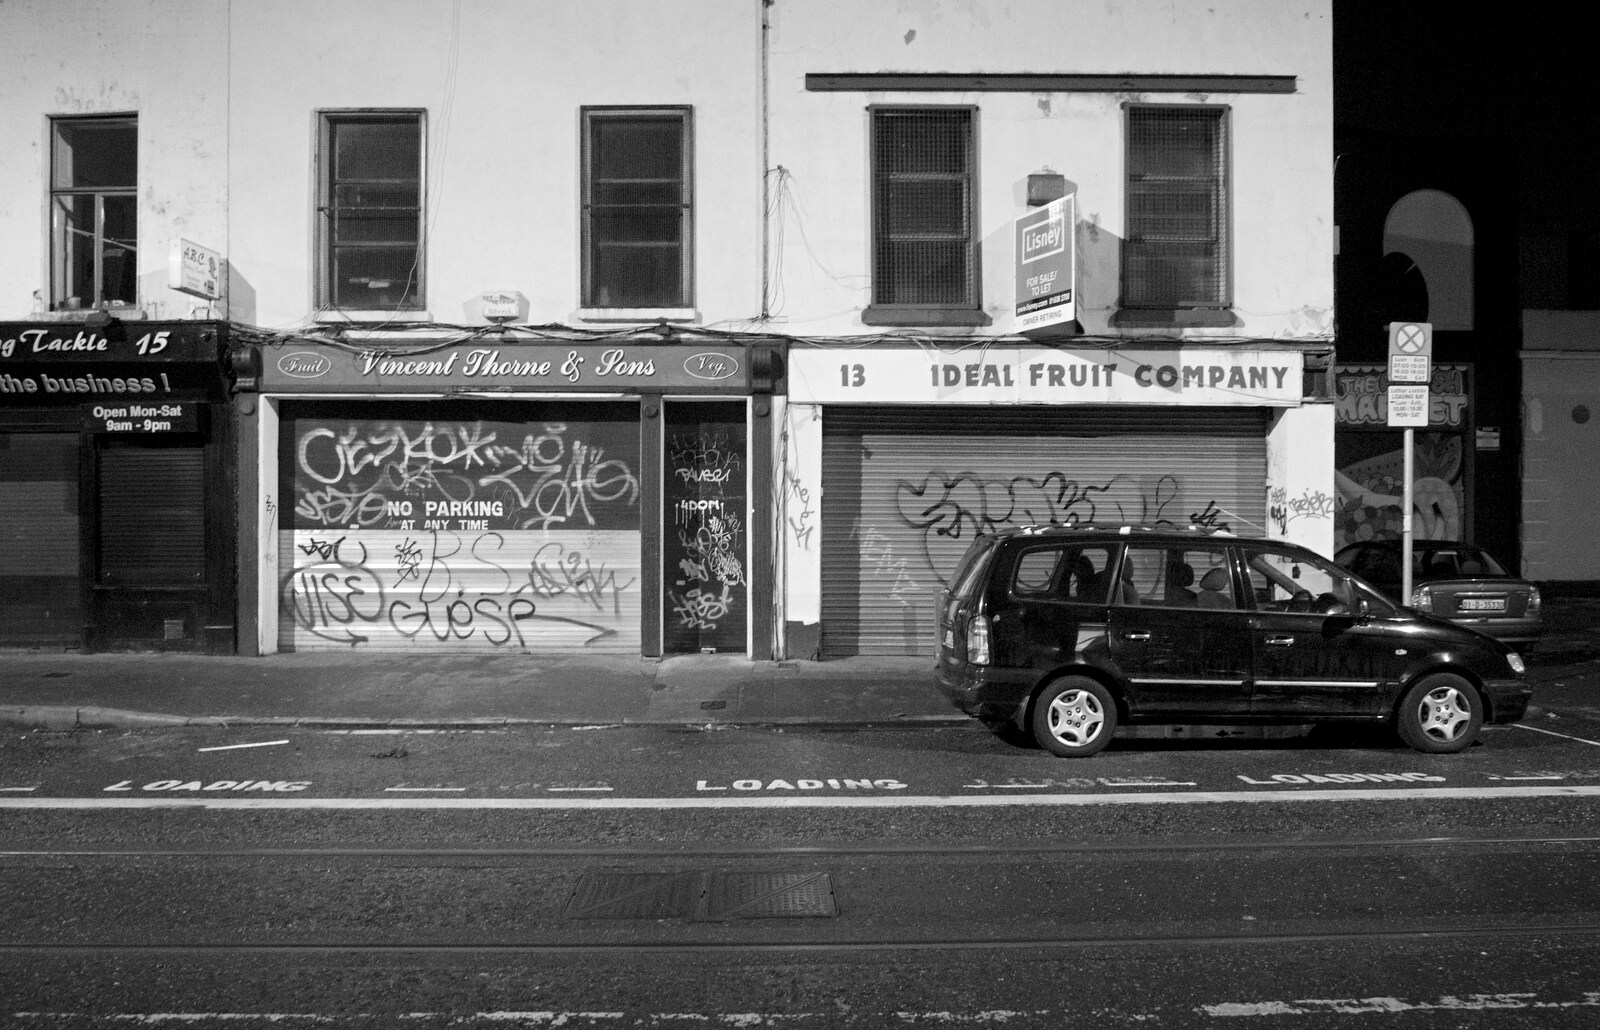 Walking past the Ideal Fruit Company again from A Night on the Lash, Dublin, Ireland - 14th December 2012